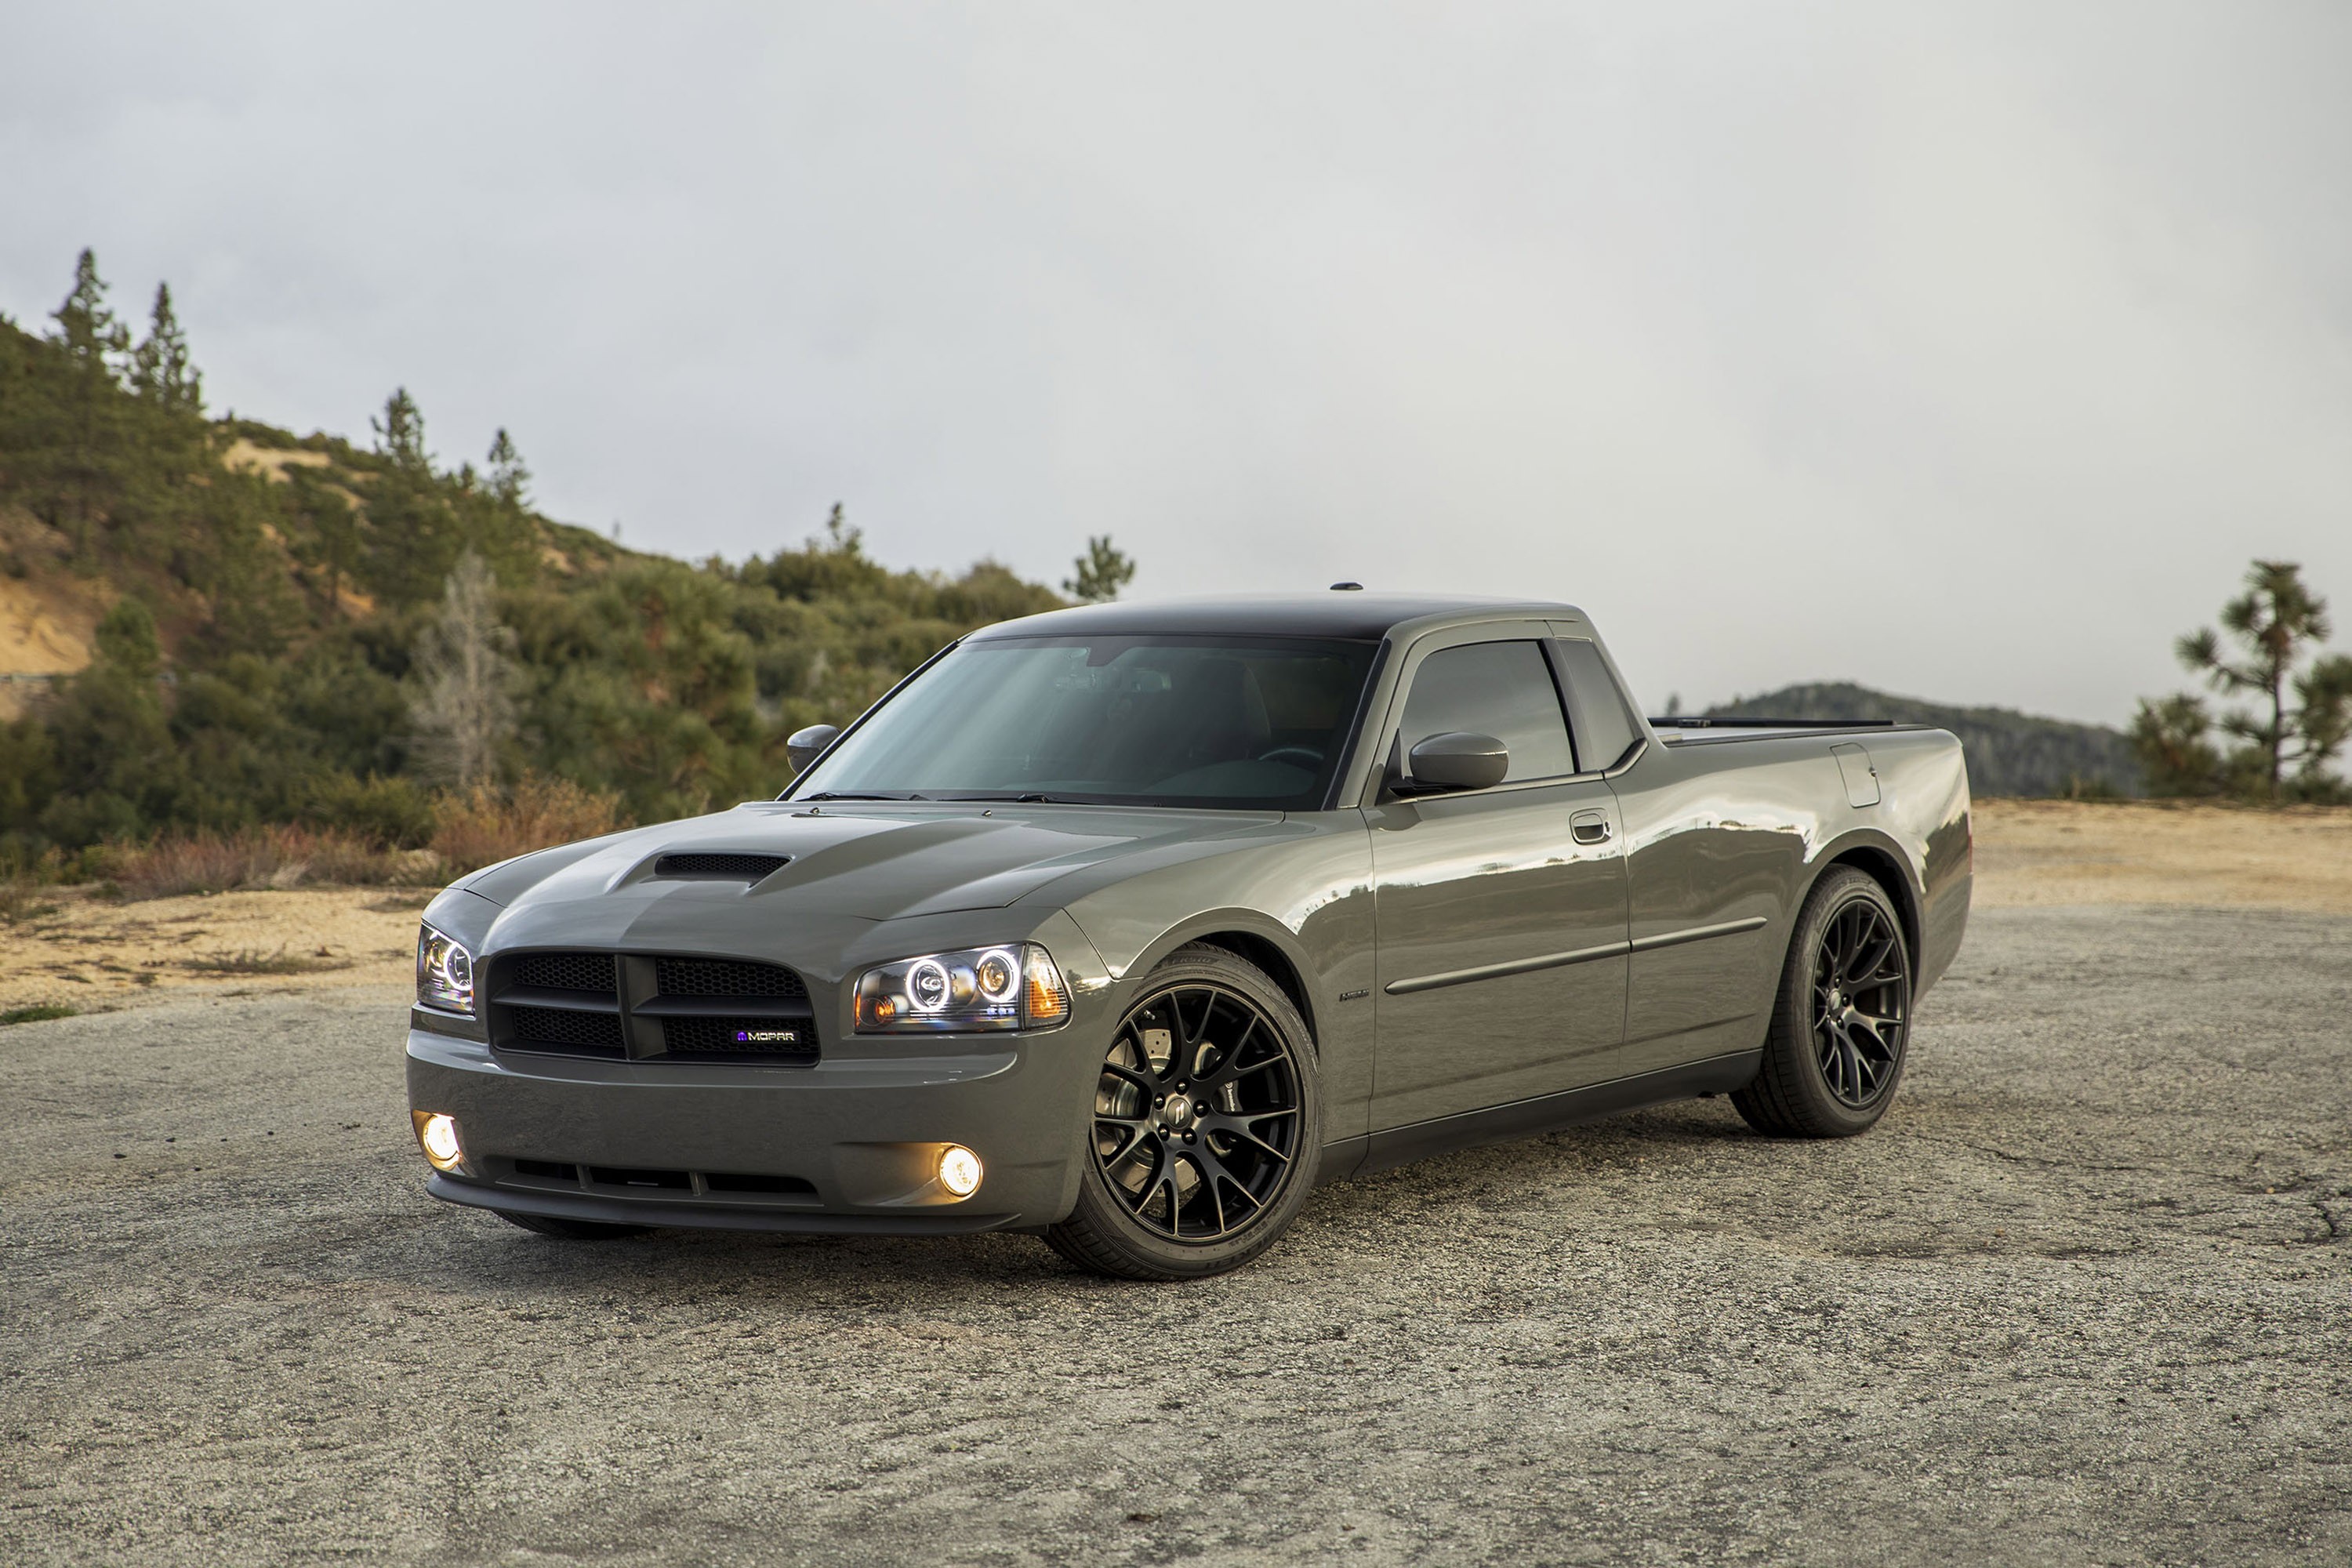 This 2009 Dodge Charger Ute Conversion Has A 392ci Hemi And A Proper Manual Transmission